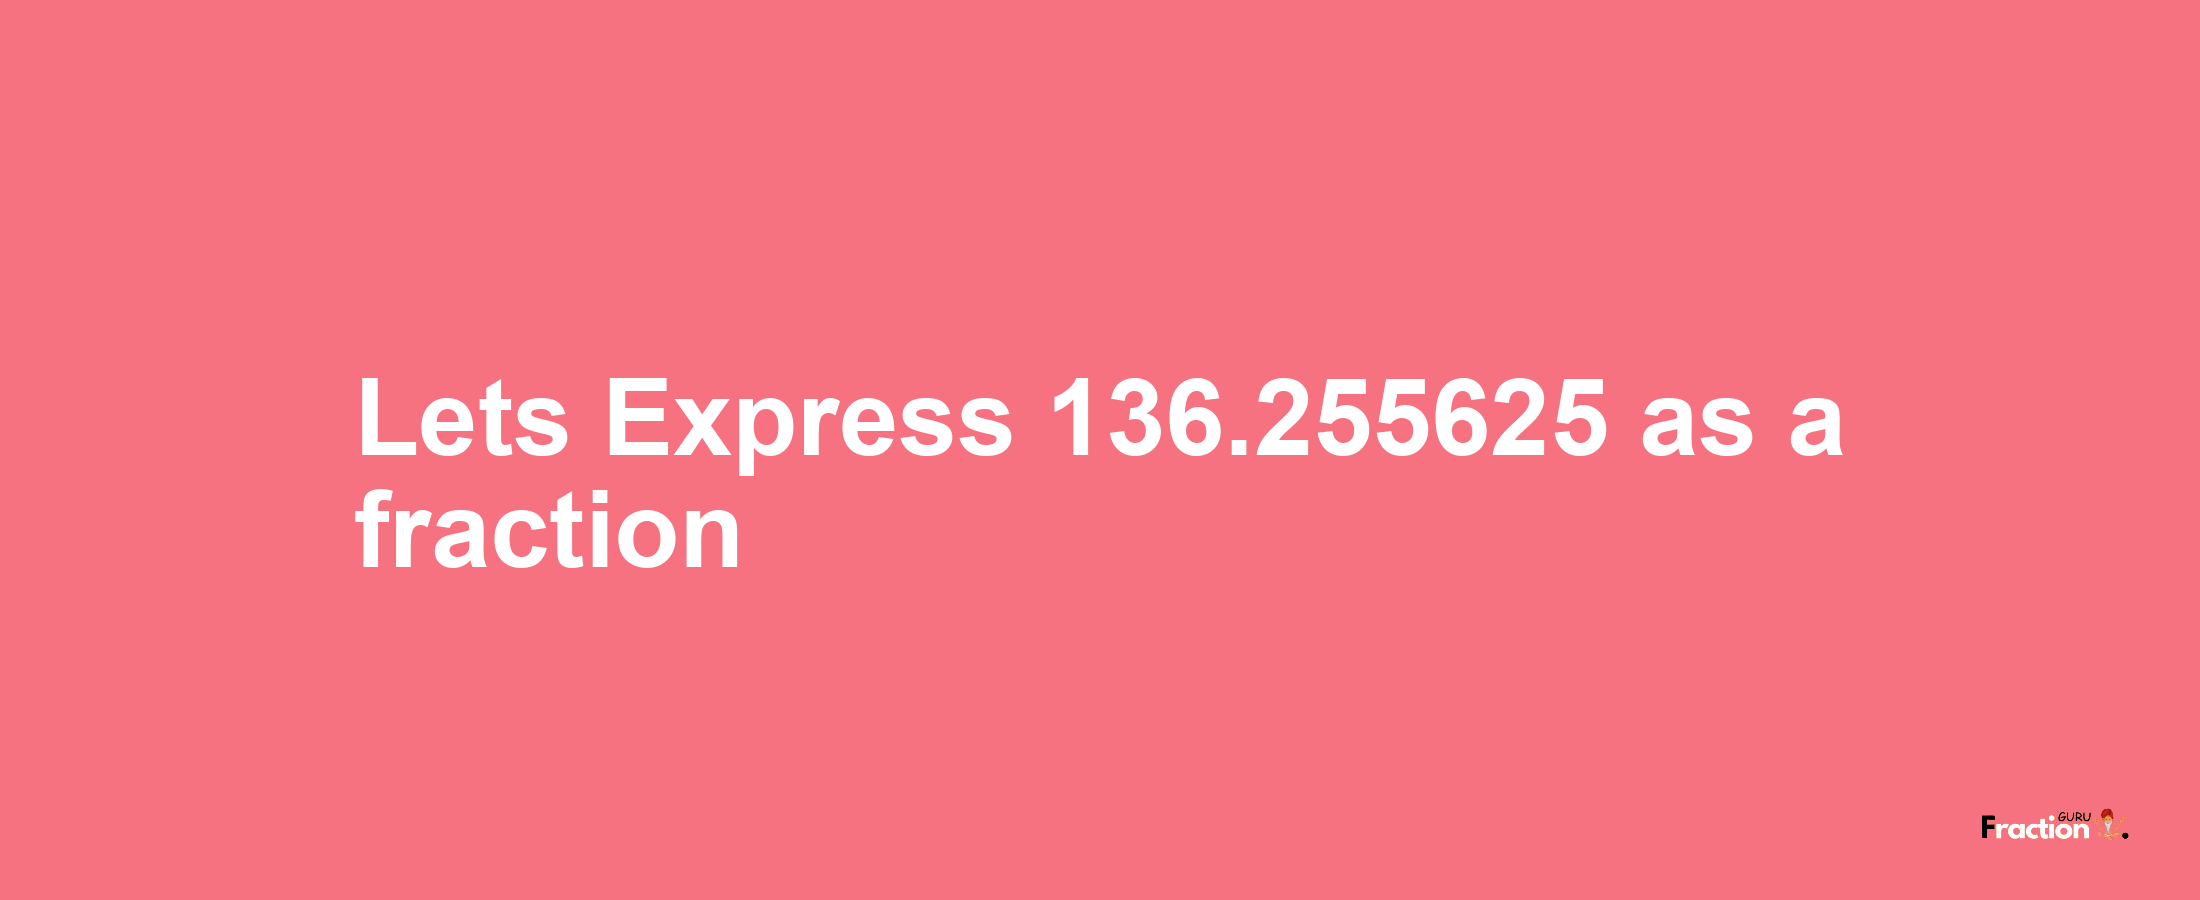 Lets Express 136.255625 as afraction